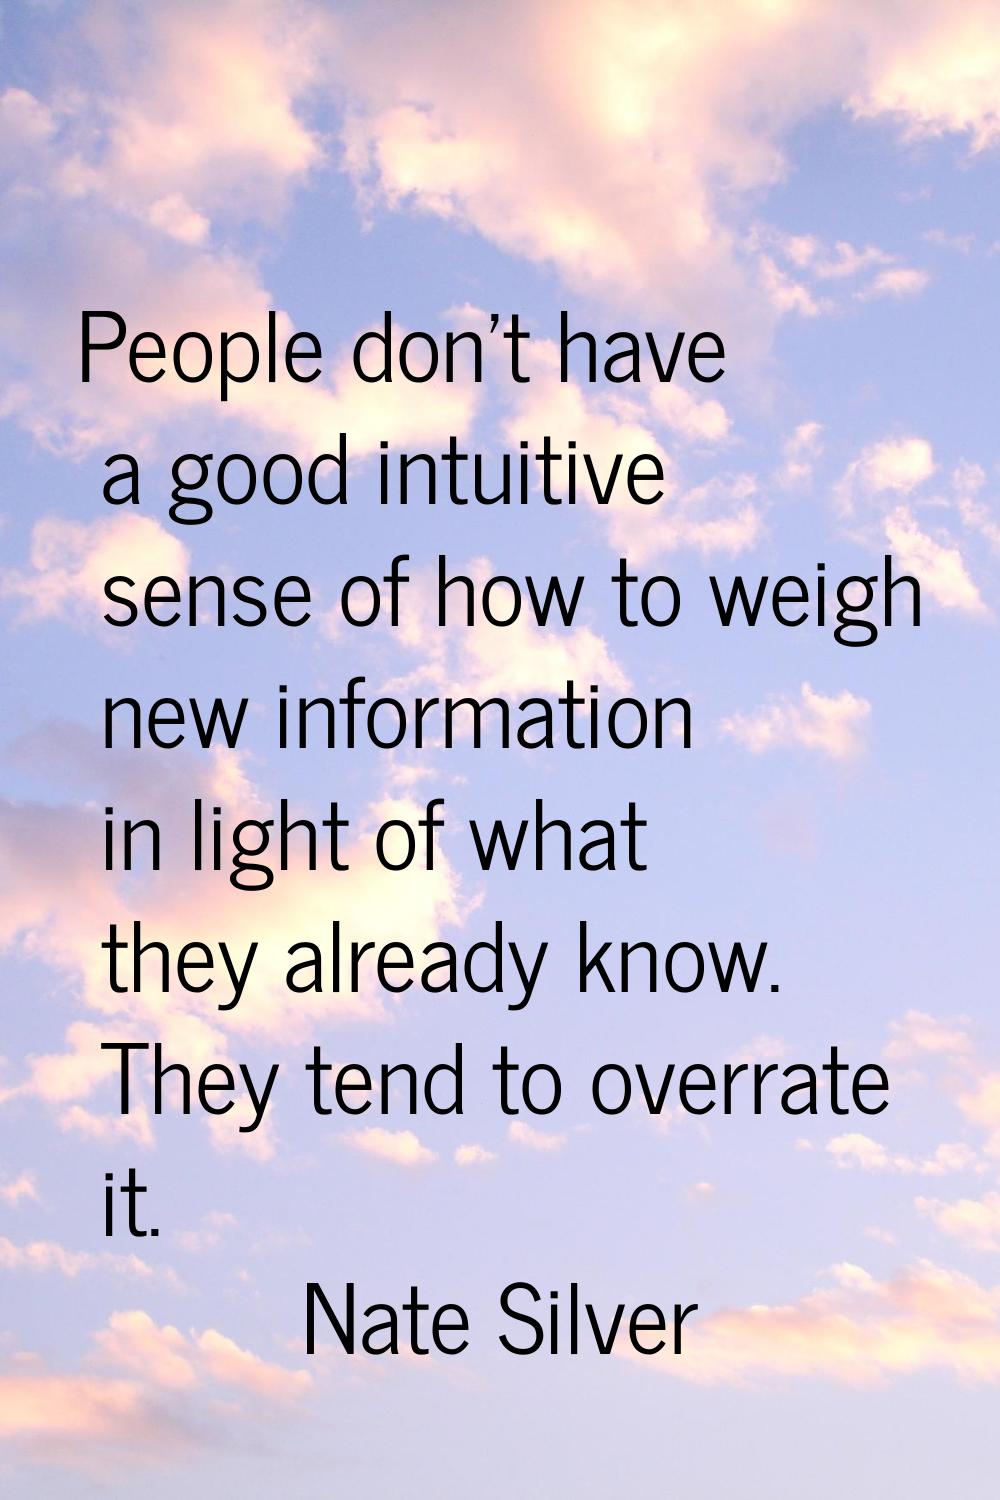 People don't have a good intuitive sense of how to weigh new information in light of what they alre